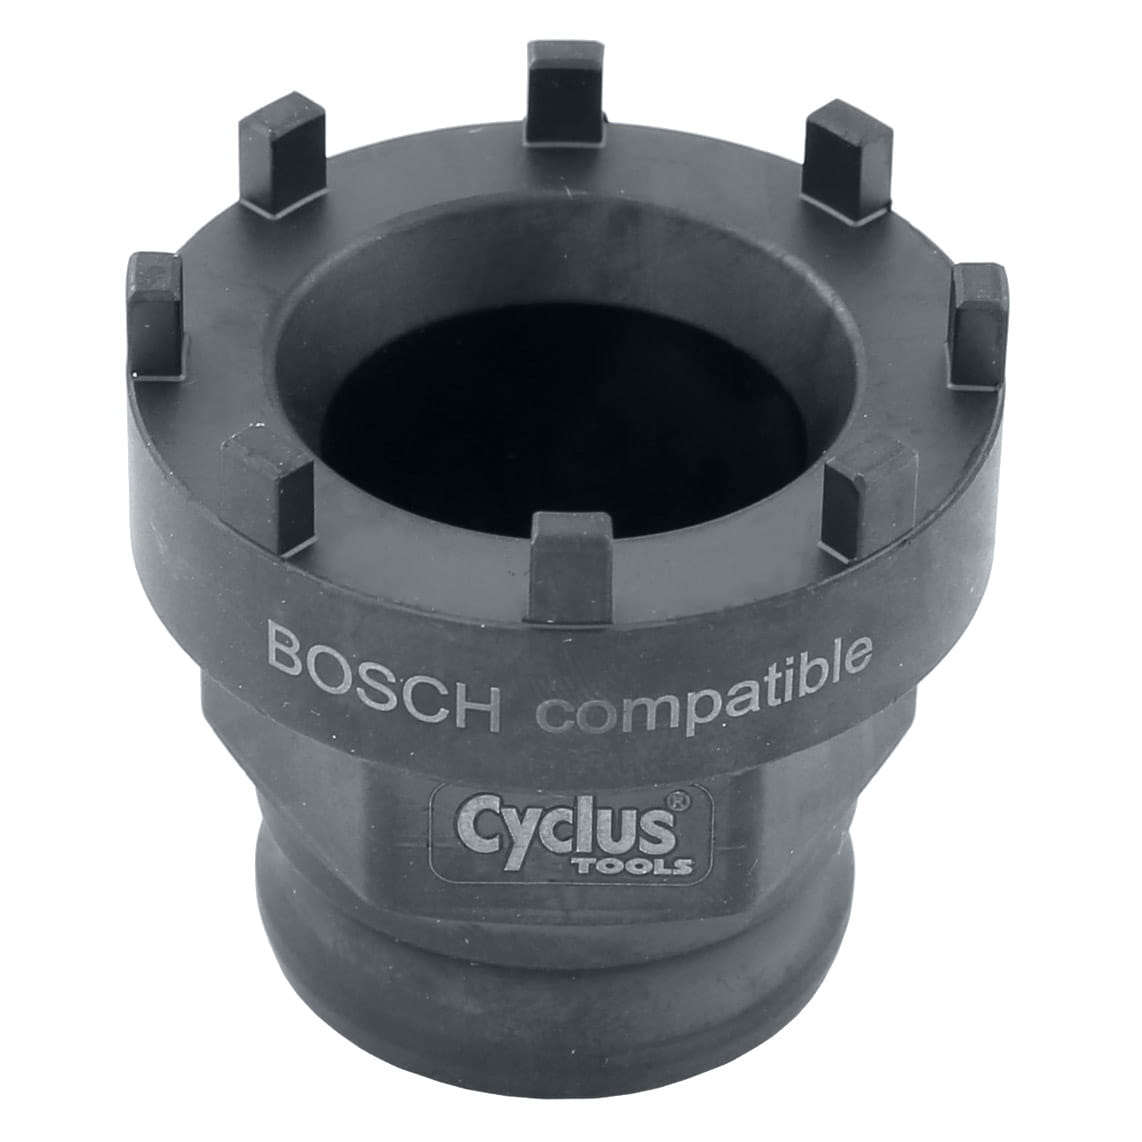 Cyclus Lockring-Tool Spider Abzieher for Bosch Generation 3/4